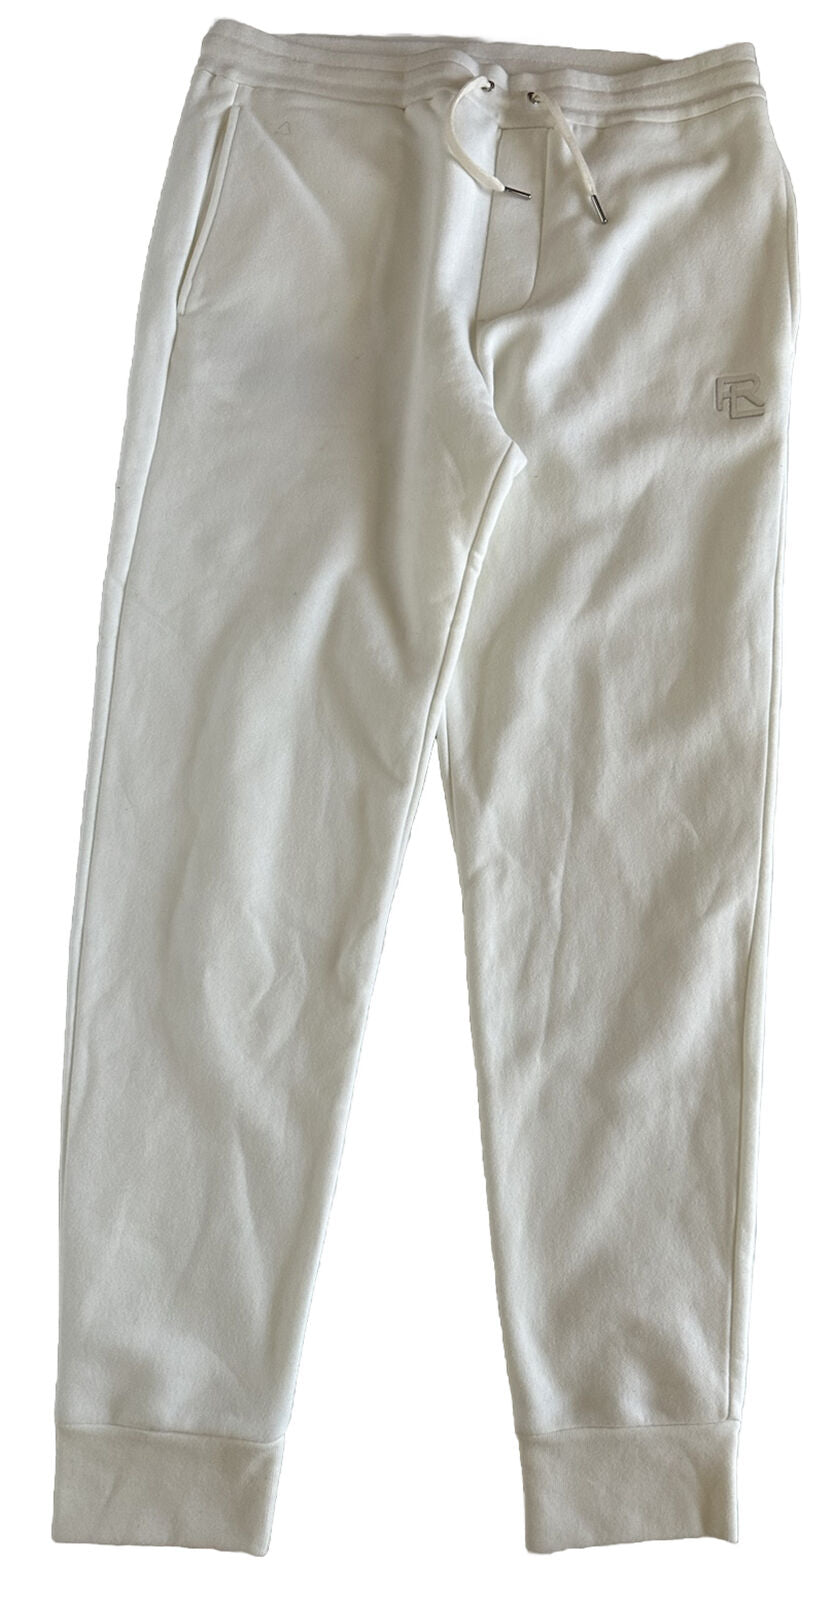 NWT $695 Ralph Lauren Purple Label Casual White Pants Large Made in Italy